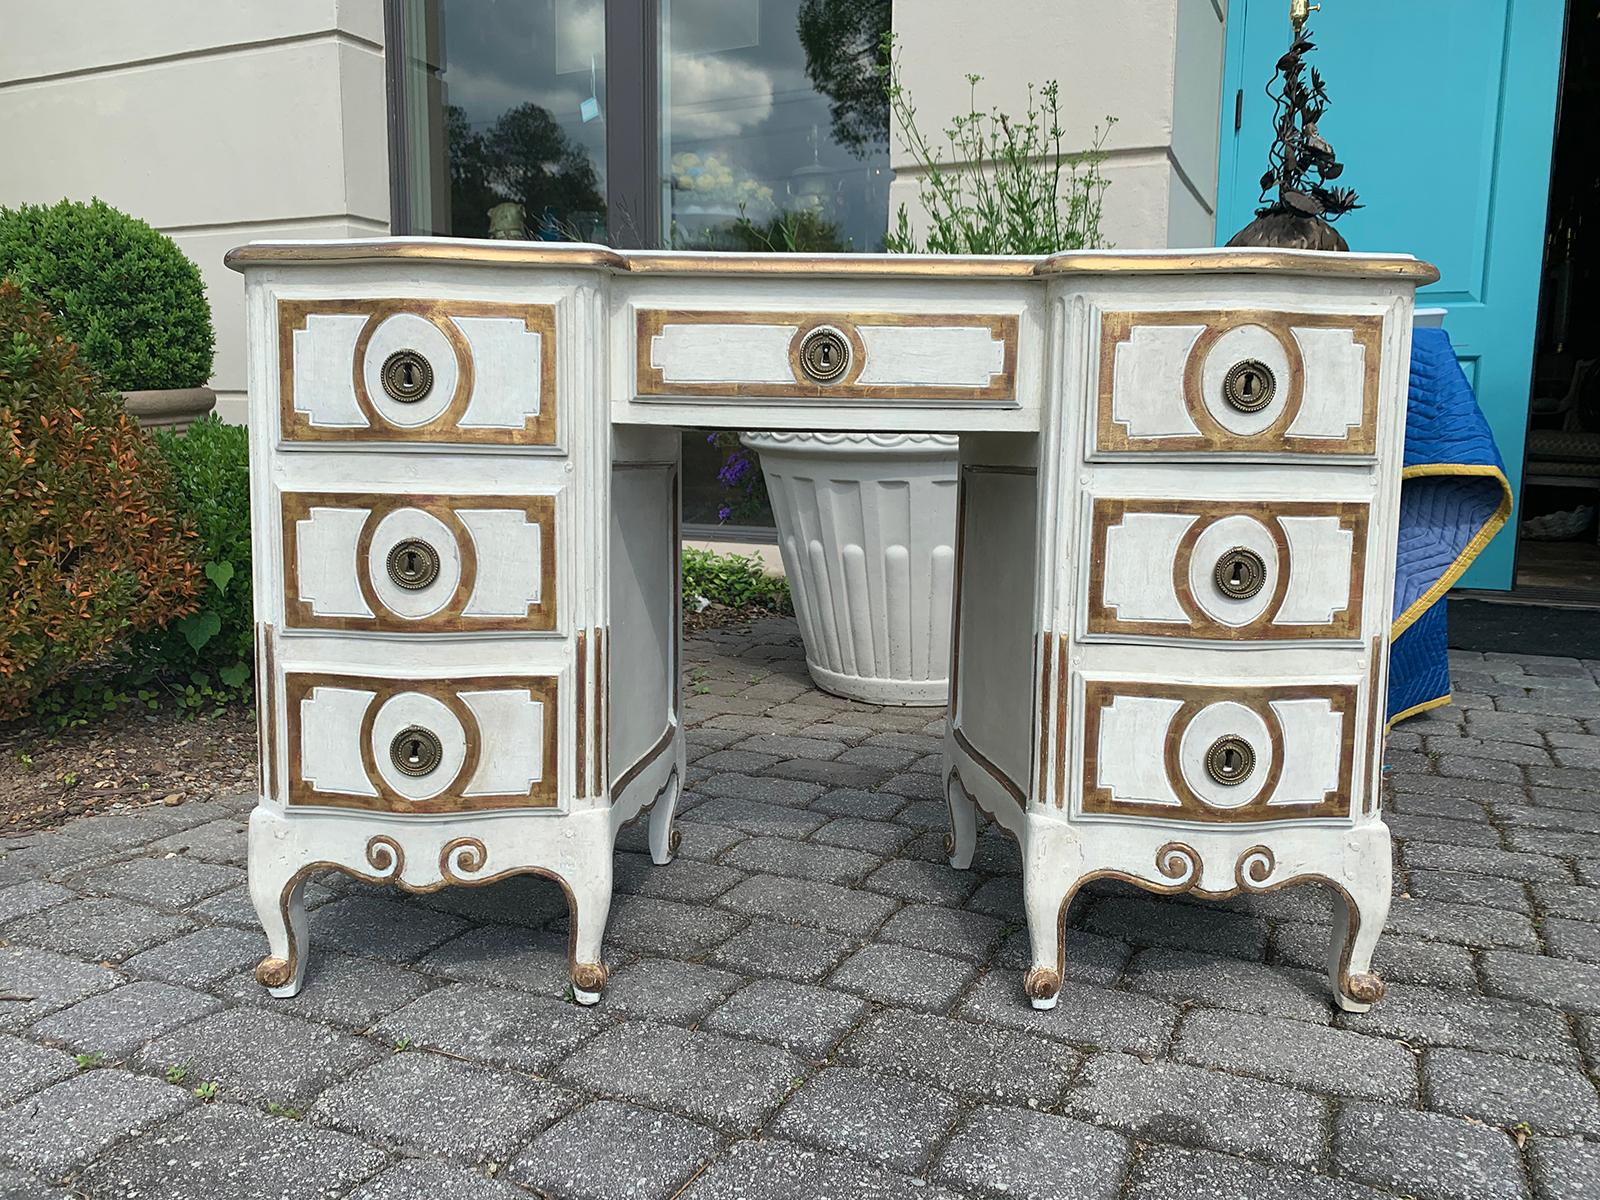 20th century italian dressing table/desk, painted white & gold
six drawers, three on each side.